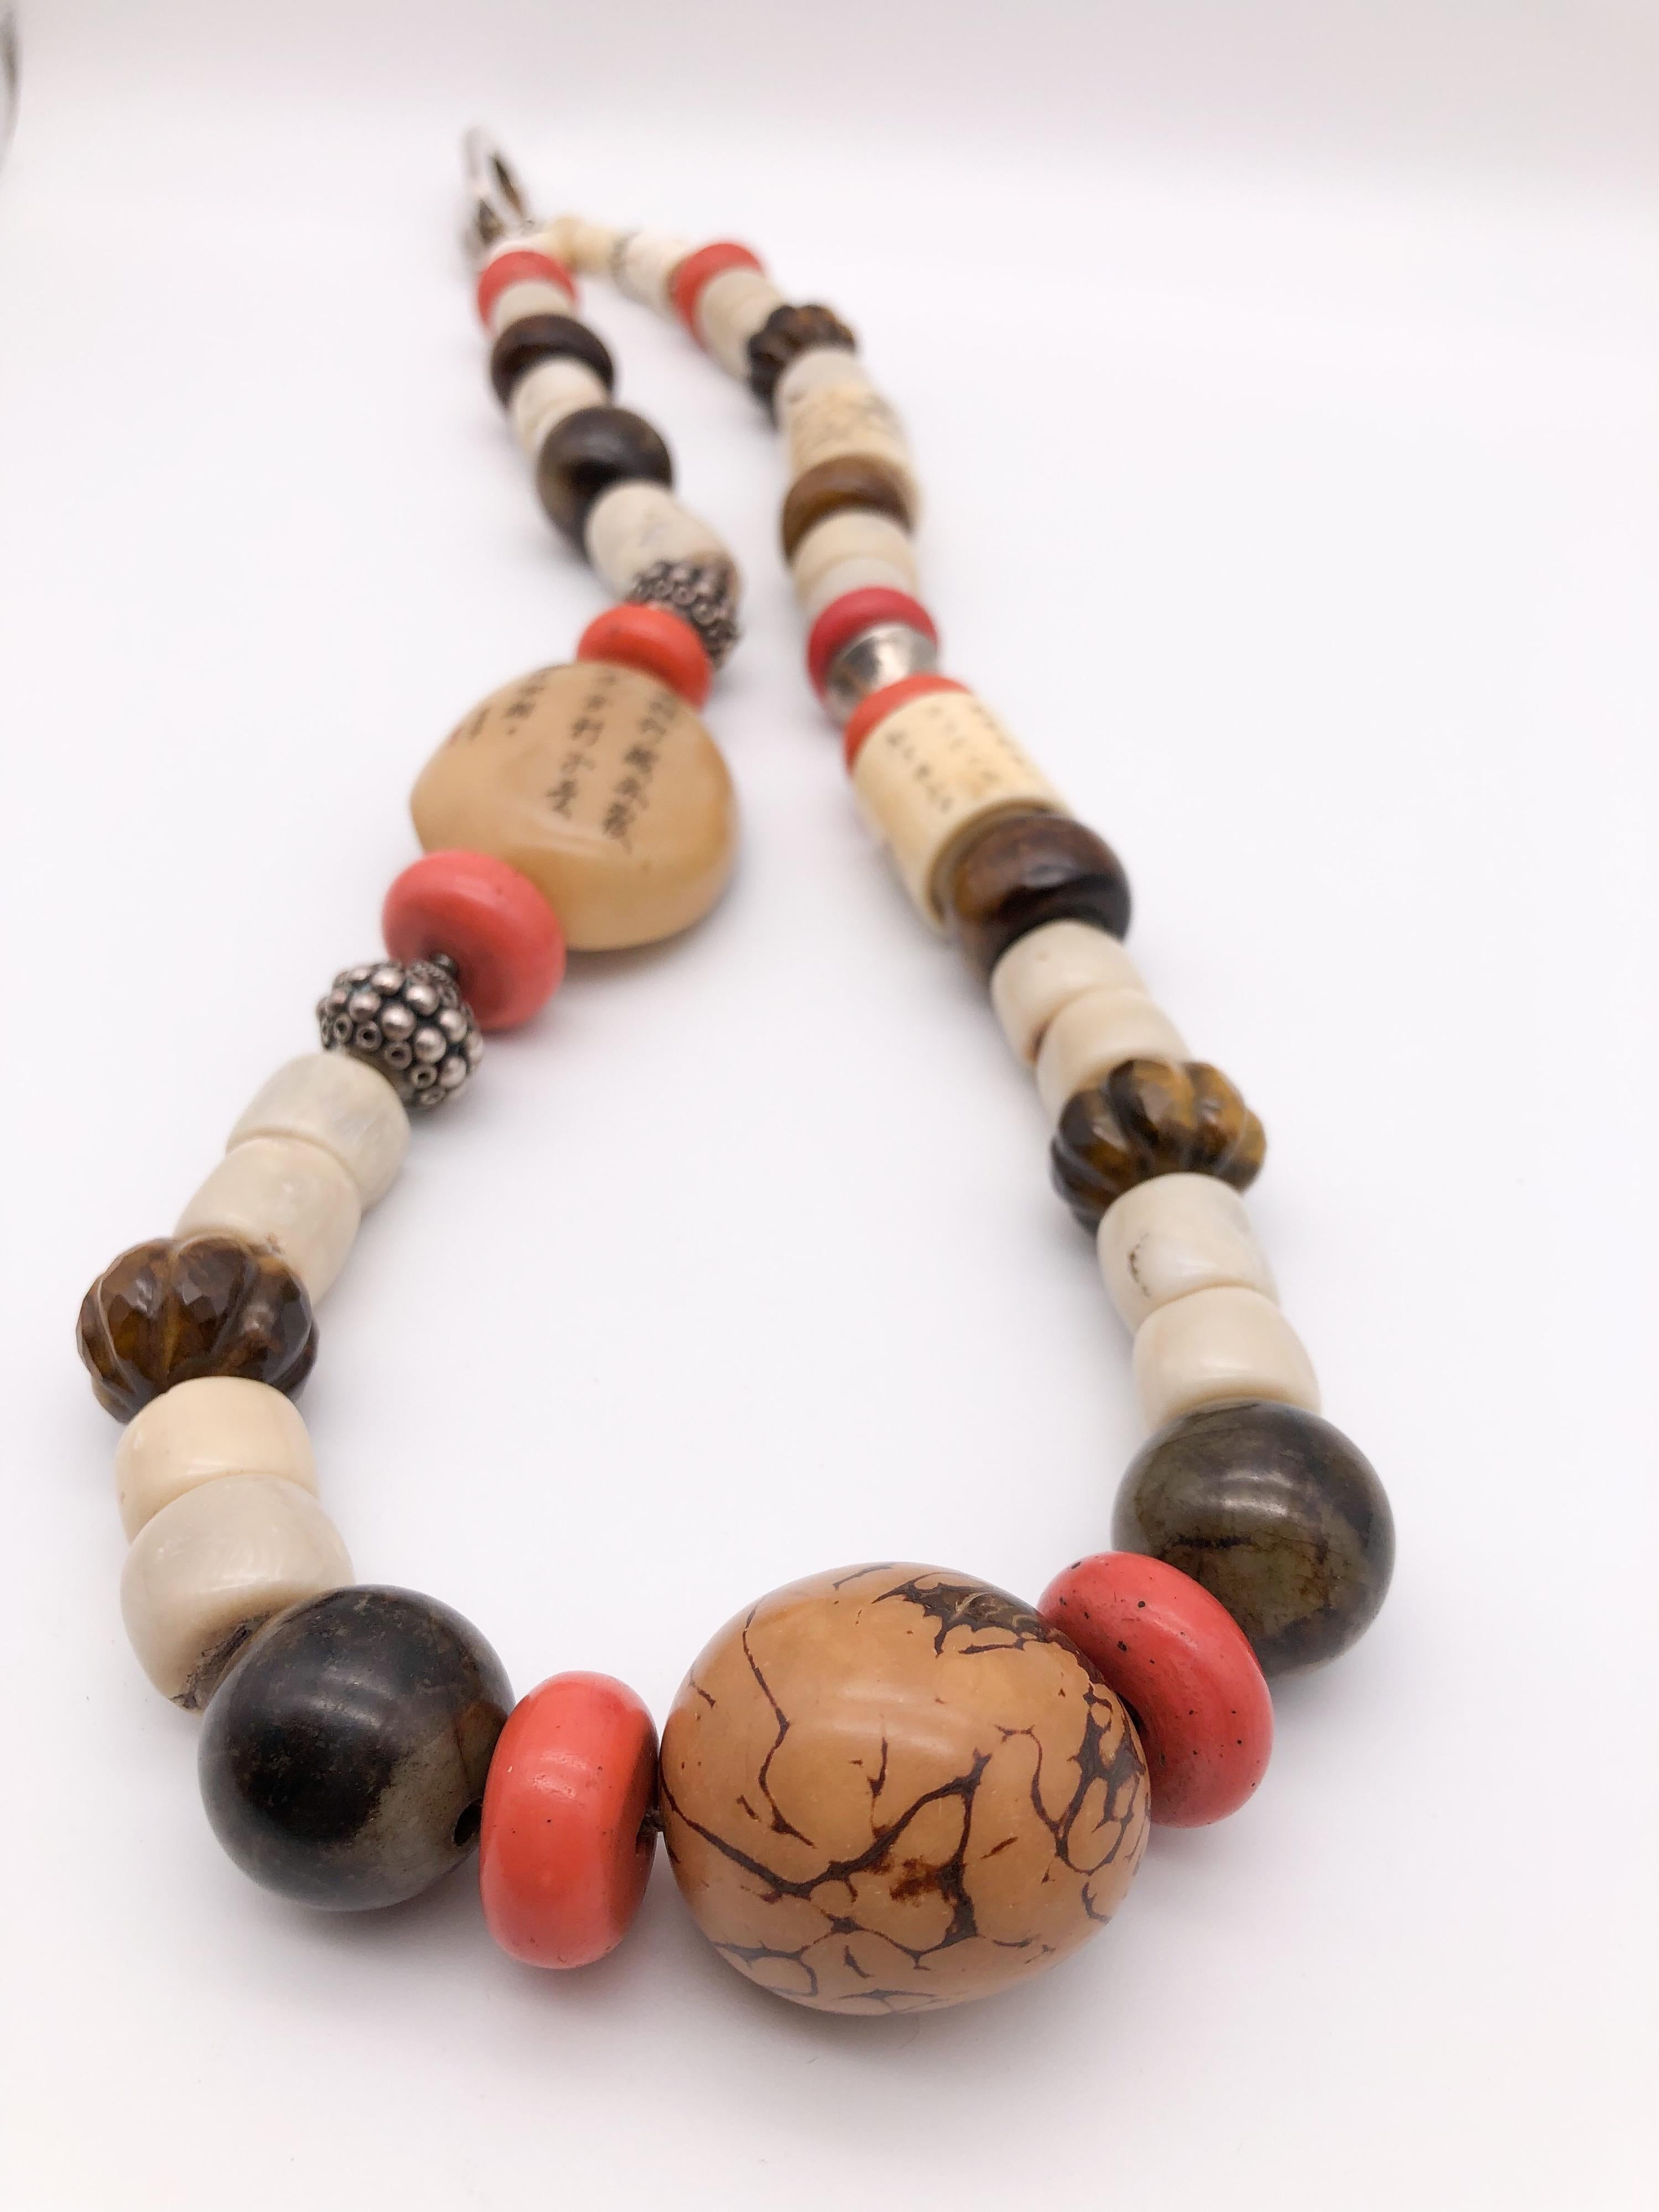 A.Jeschel Colorful Ethnic Tibetan beads and Carved Buddha necklace In New Condition For Sale In Miami, FL